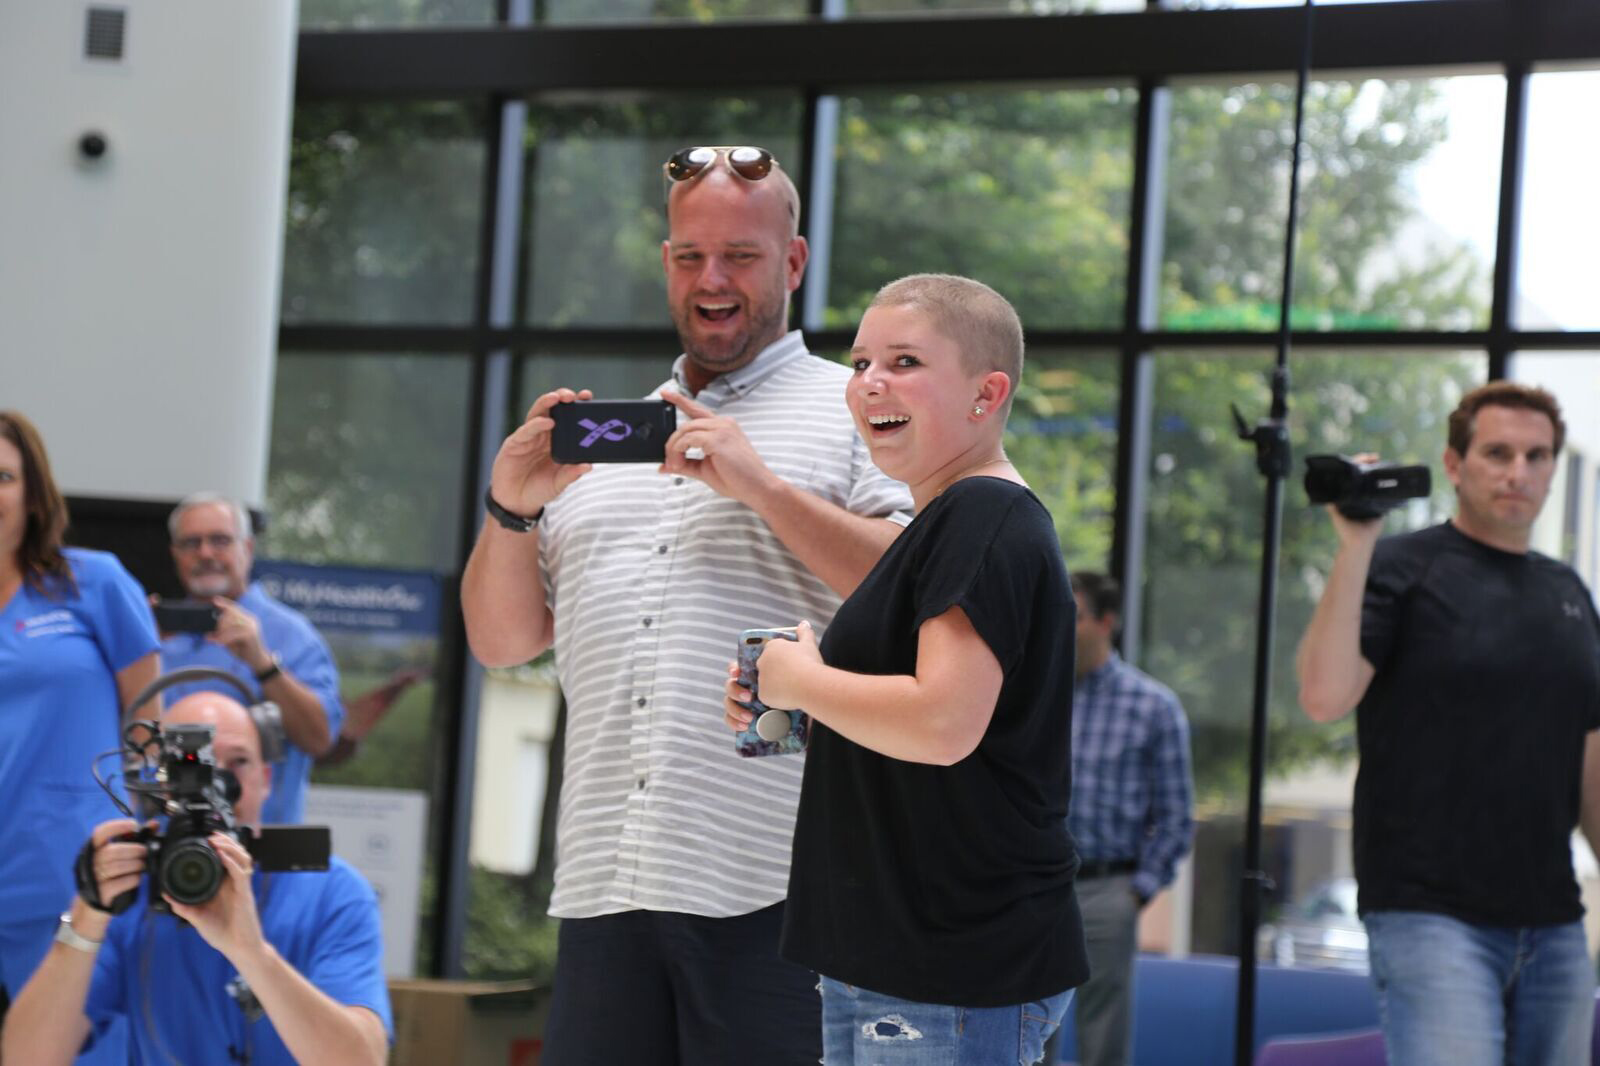 PHOTO: Alex Kiker, 11, was surprised with a flash mob at Medical City Children's Hospital in Dallas and a dream beach vacation by Make-A-Wish North Texas.